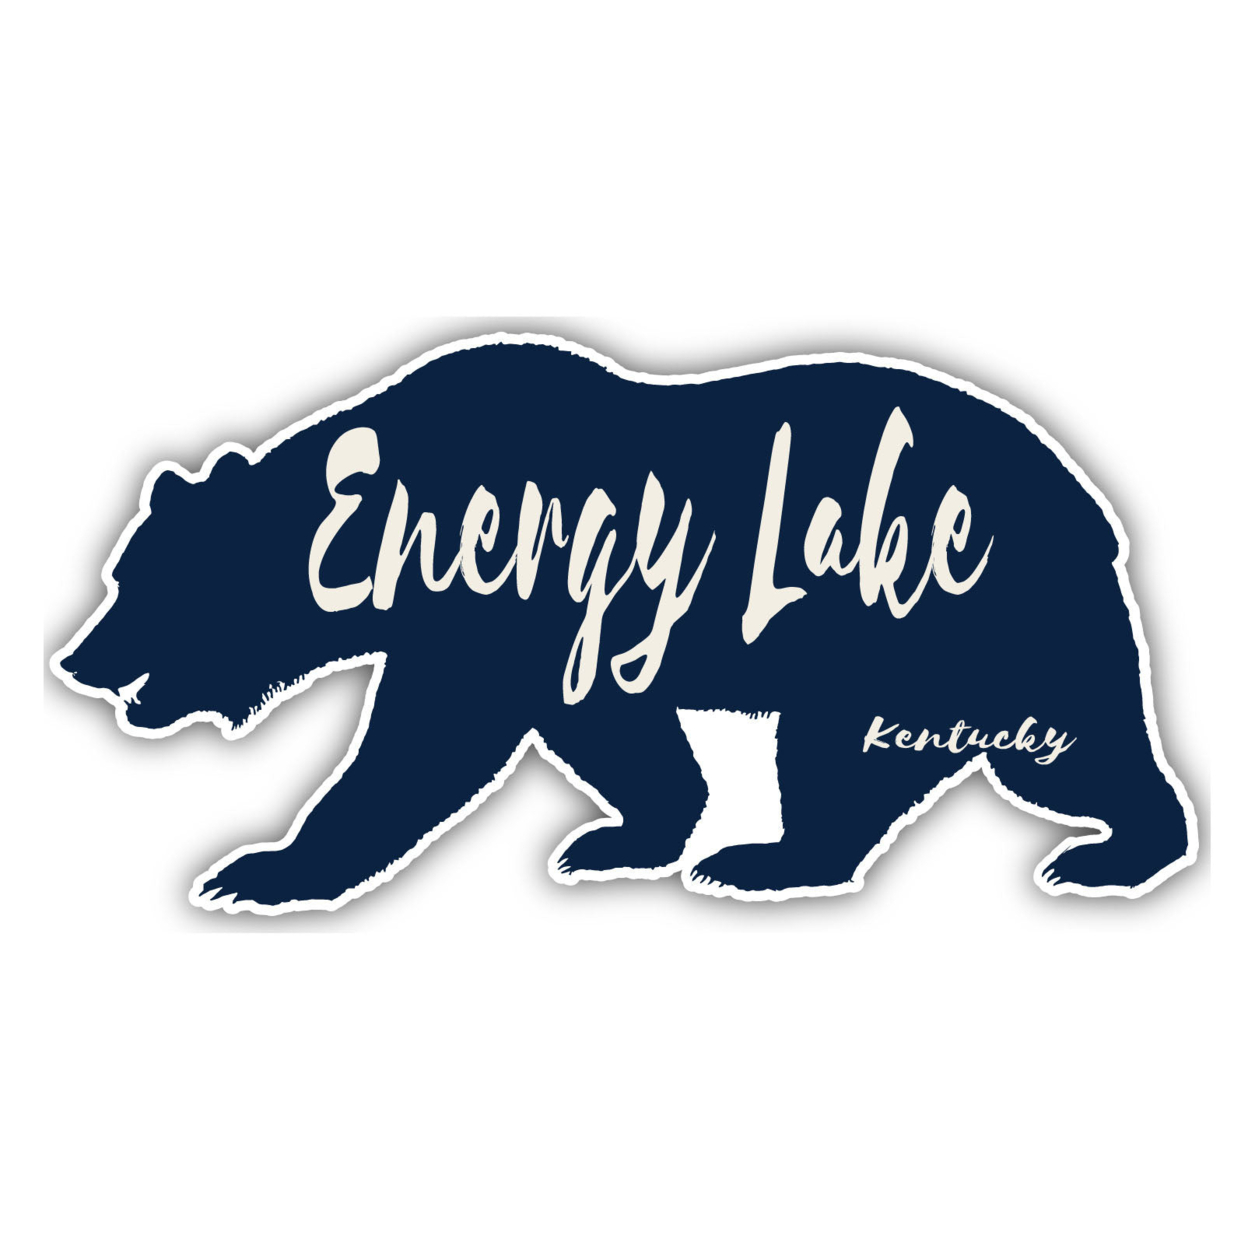 Energy Lake Kentucky Souvenir Decorative Stickers (Choose Theme And Size) - 4-Pack, 6-Inch, Bear